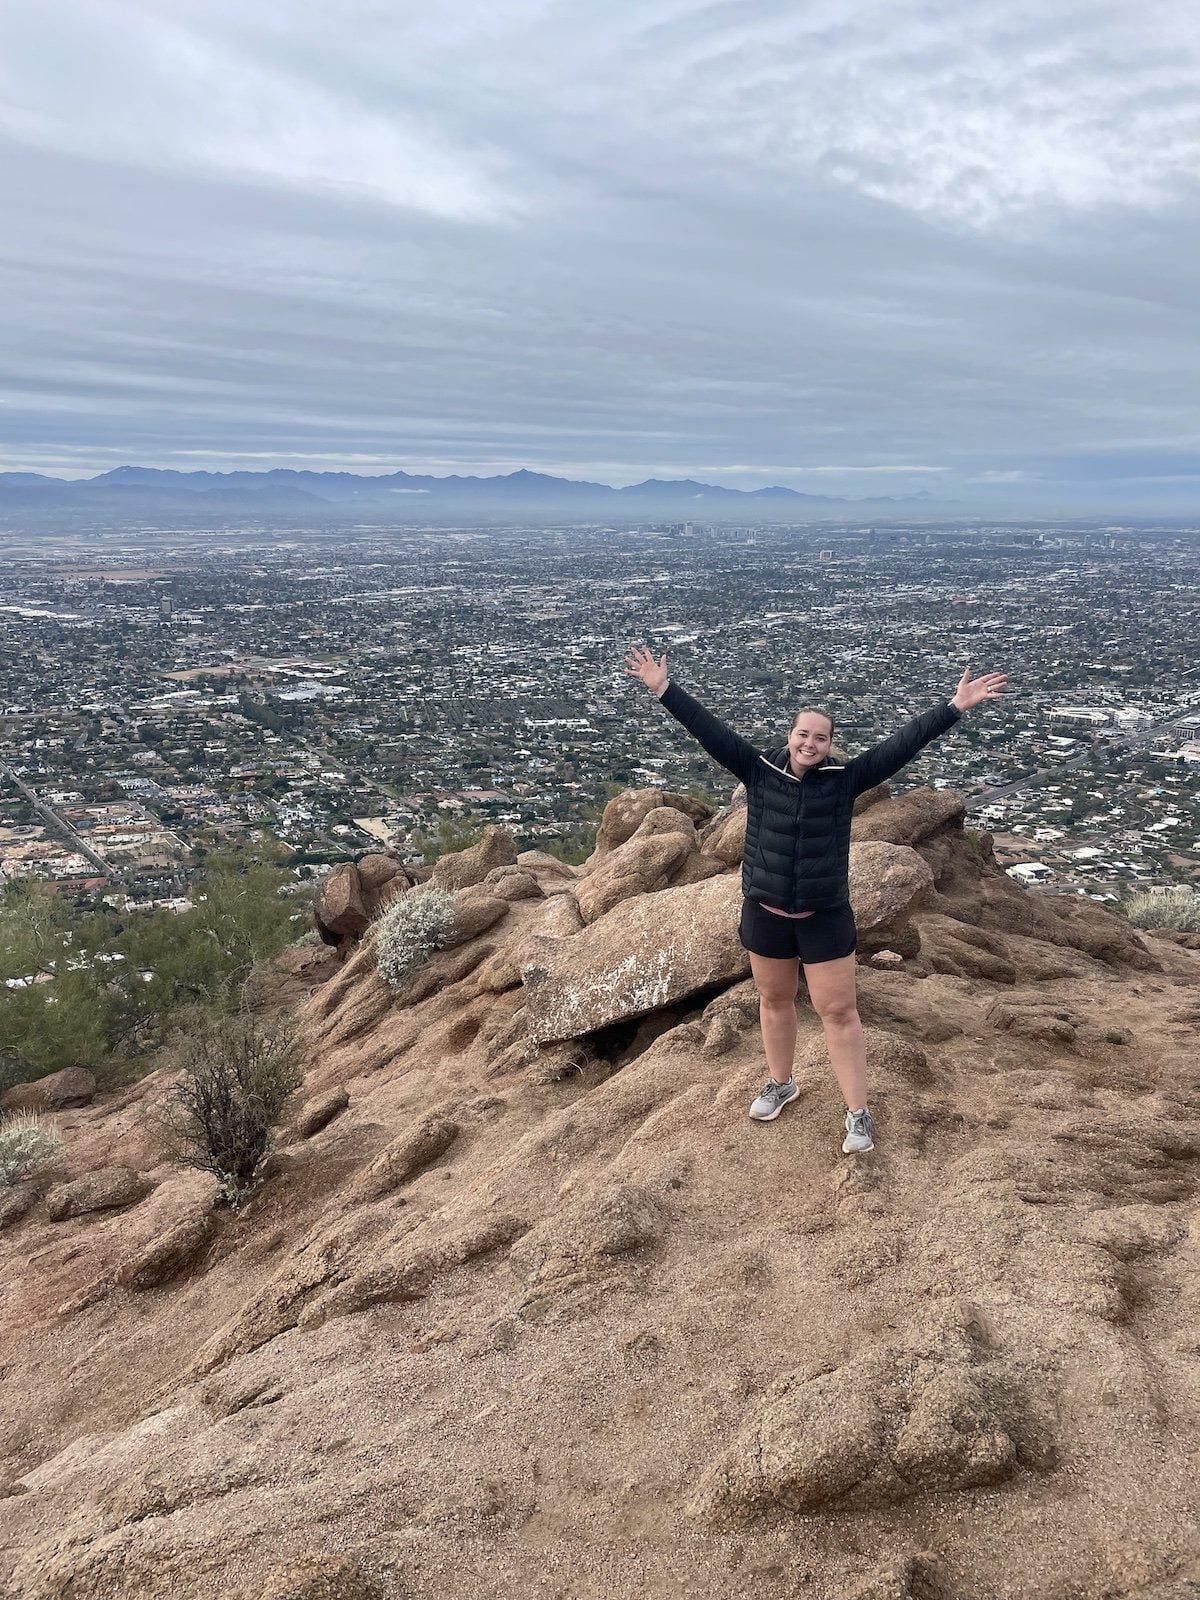 View from Camelback Mountain